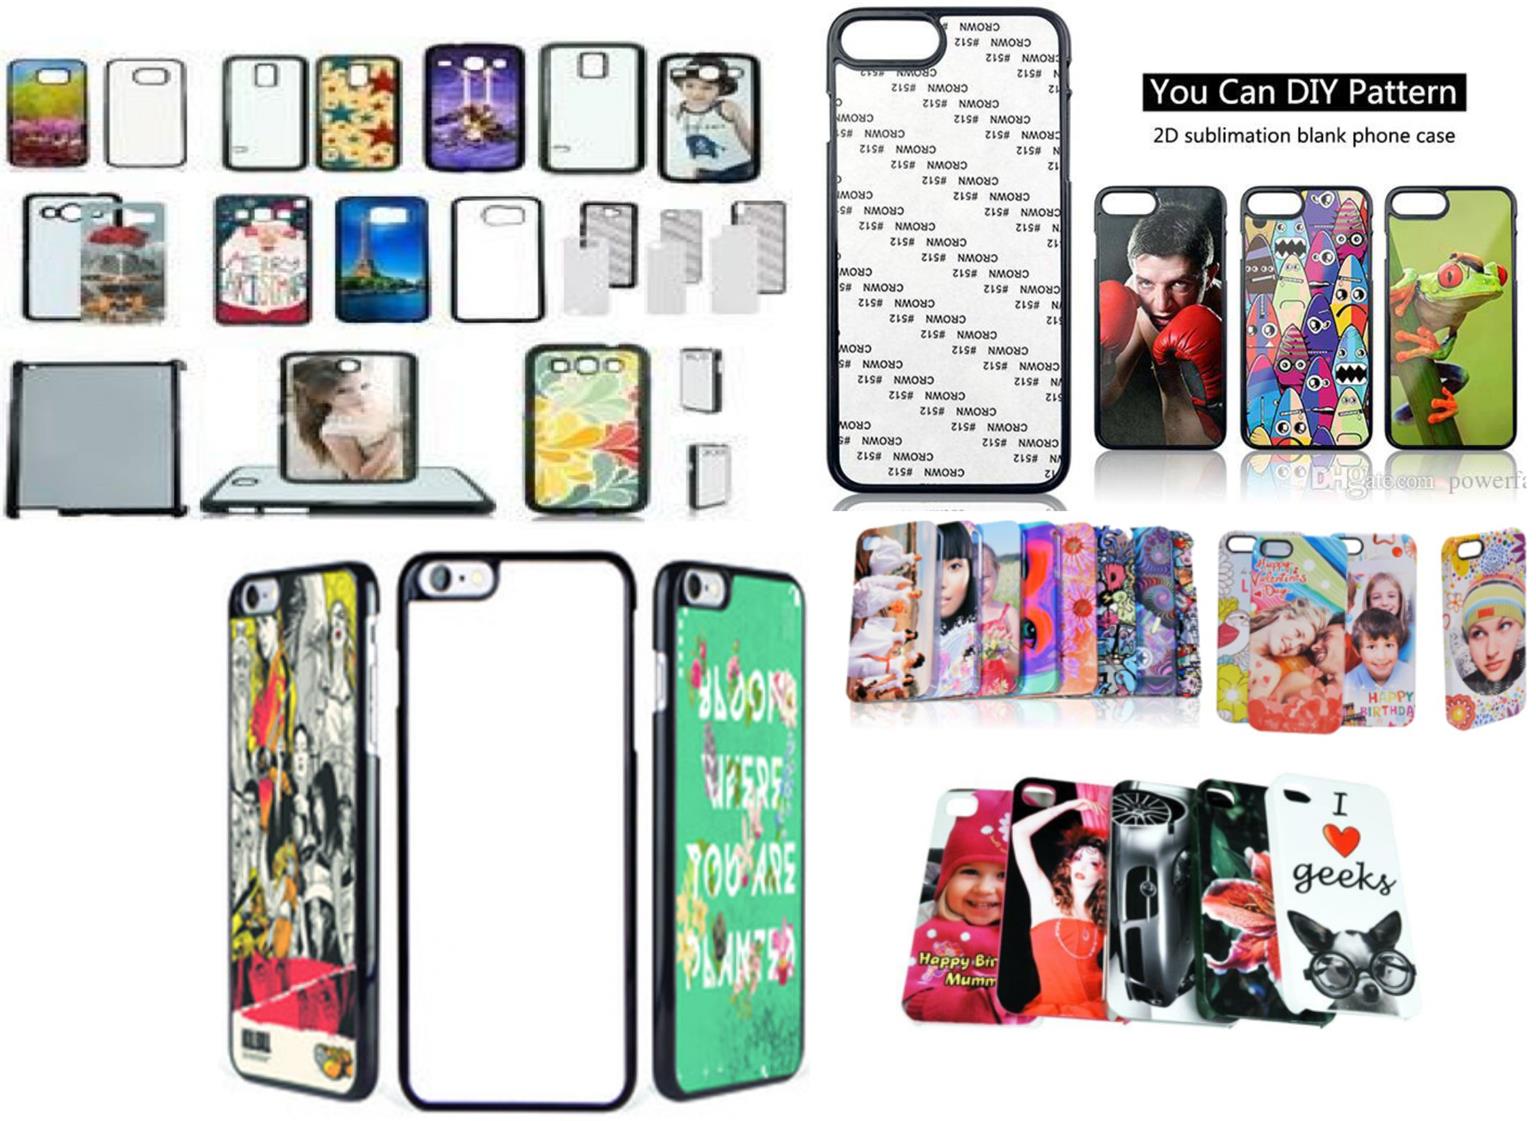 2D SUBLIMATION PHONE COVERS ON SALE 